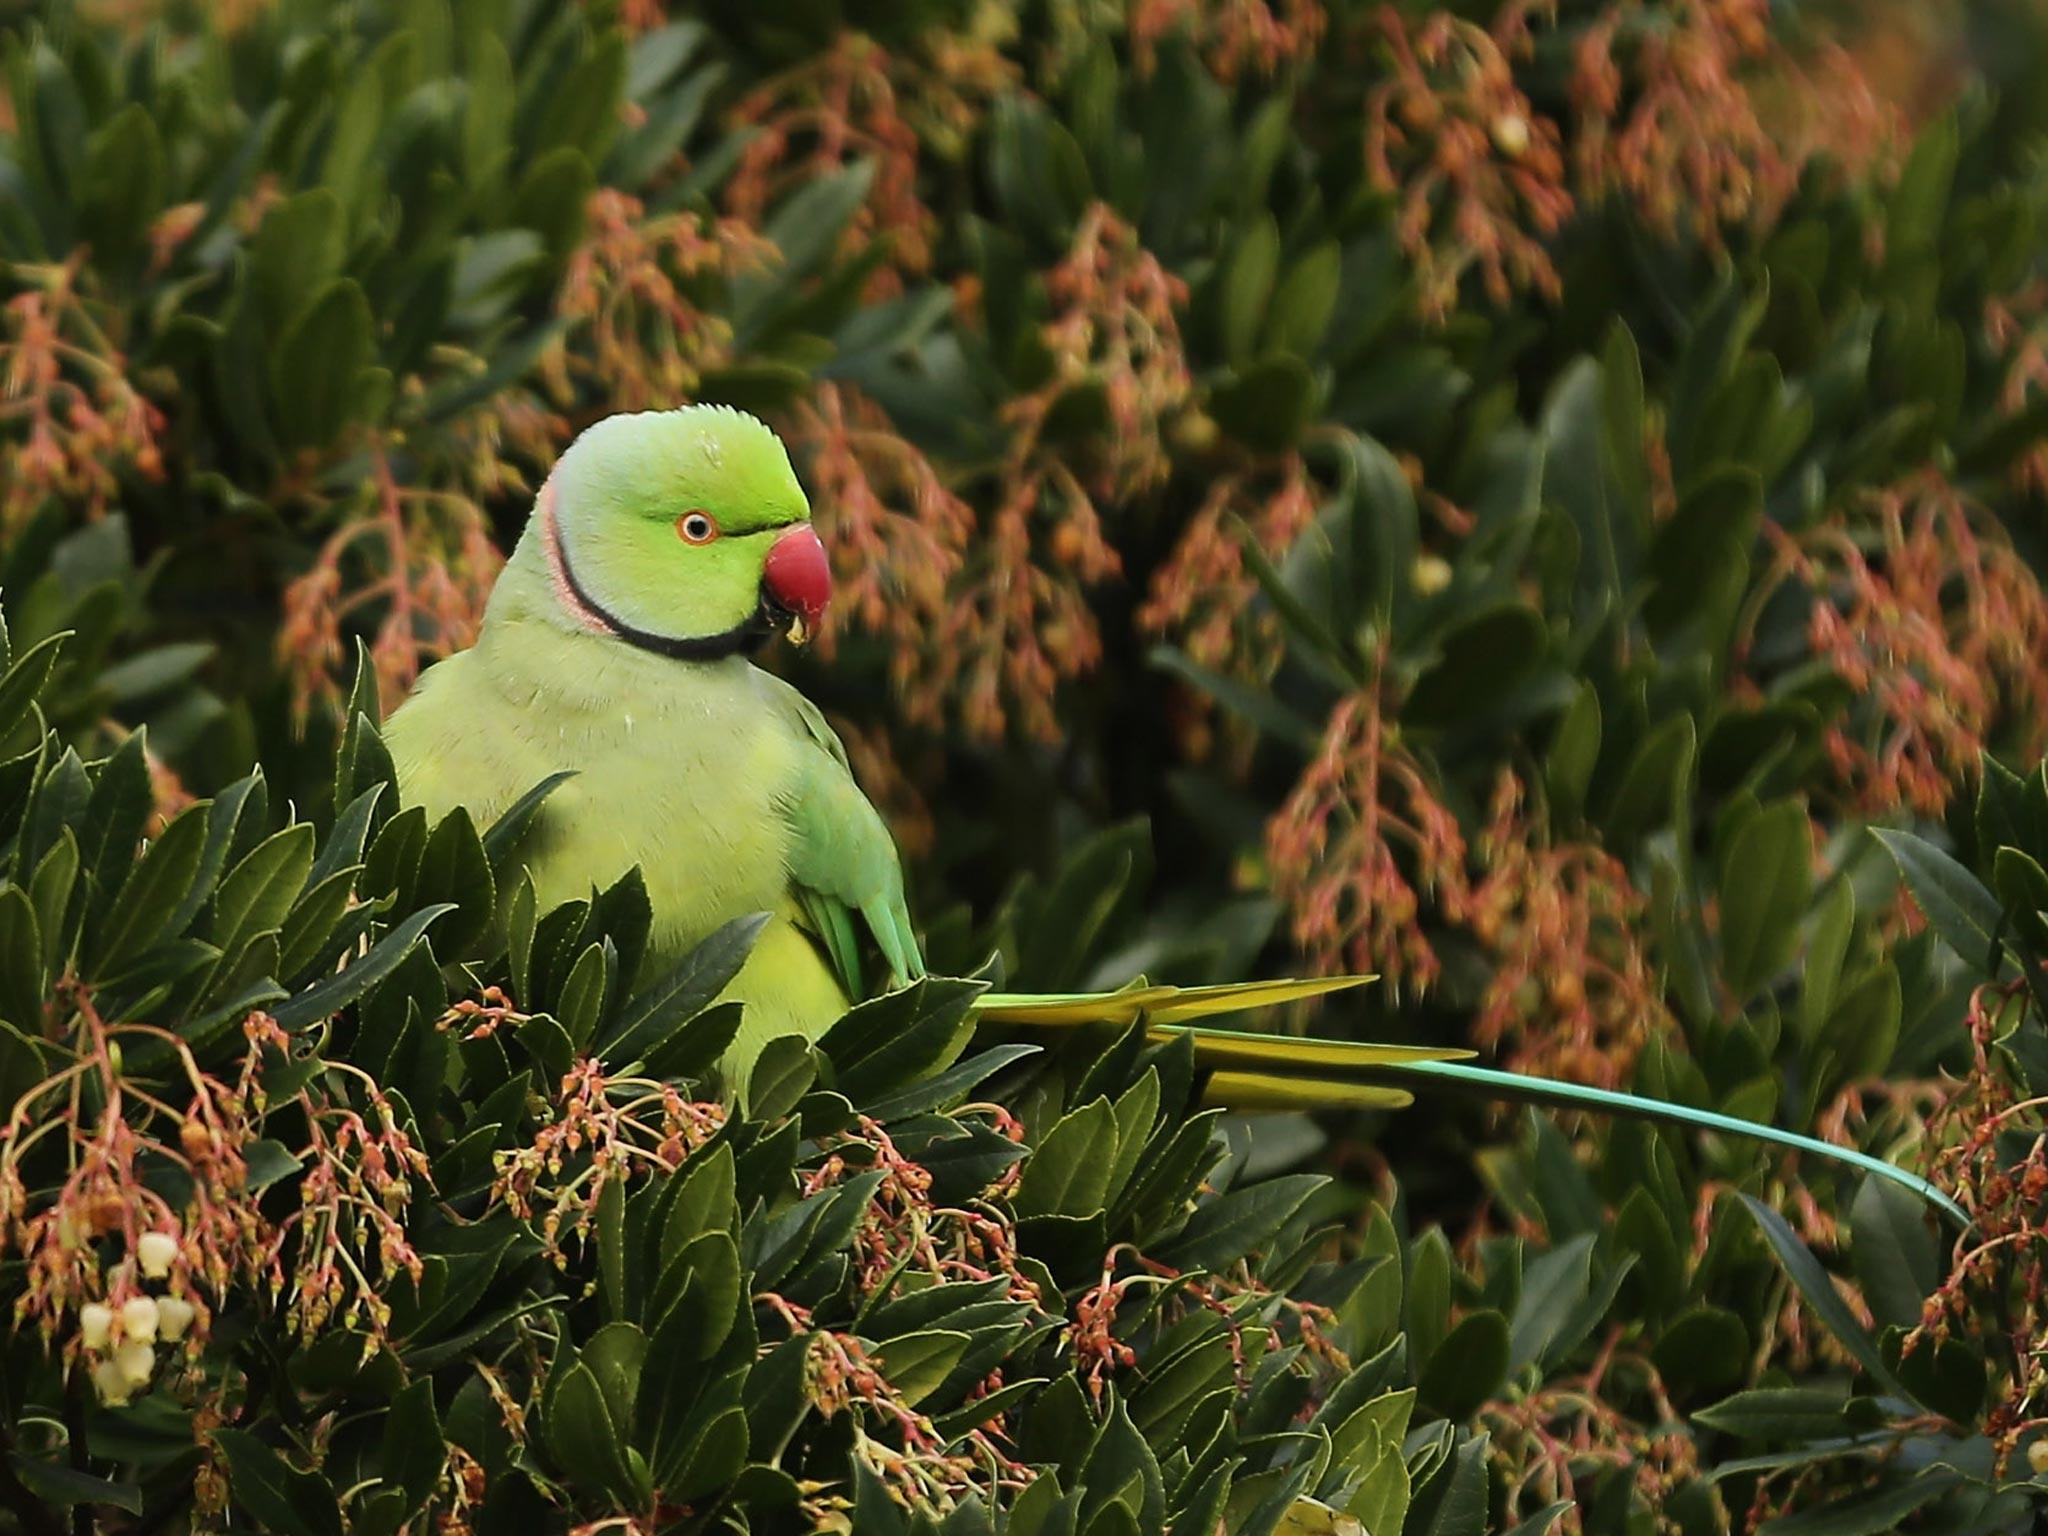 Those who try and stop officials from destroying "invasive species" such as parakeets could face prison